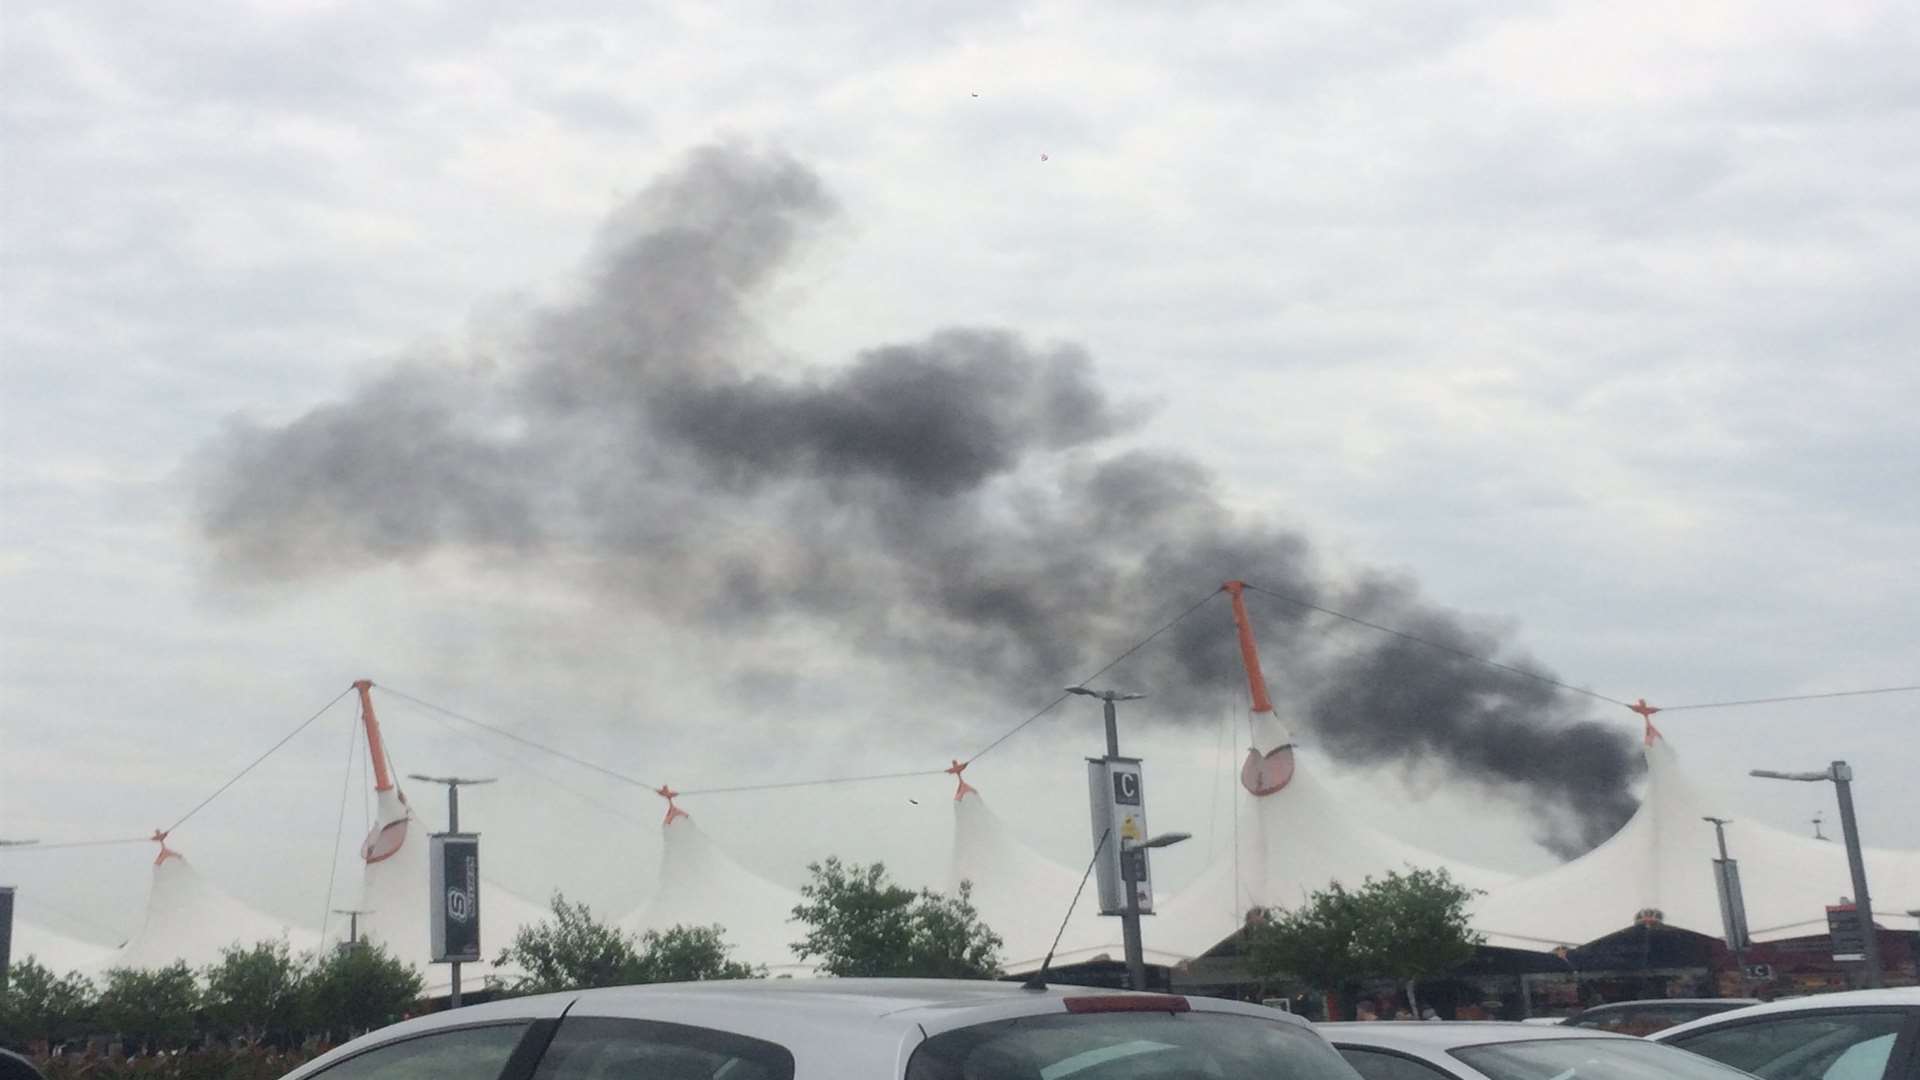 Smoke billowed into the air above the designer outlet. Picture: @mynameiszoeee on Twitter